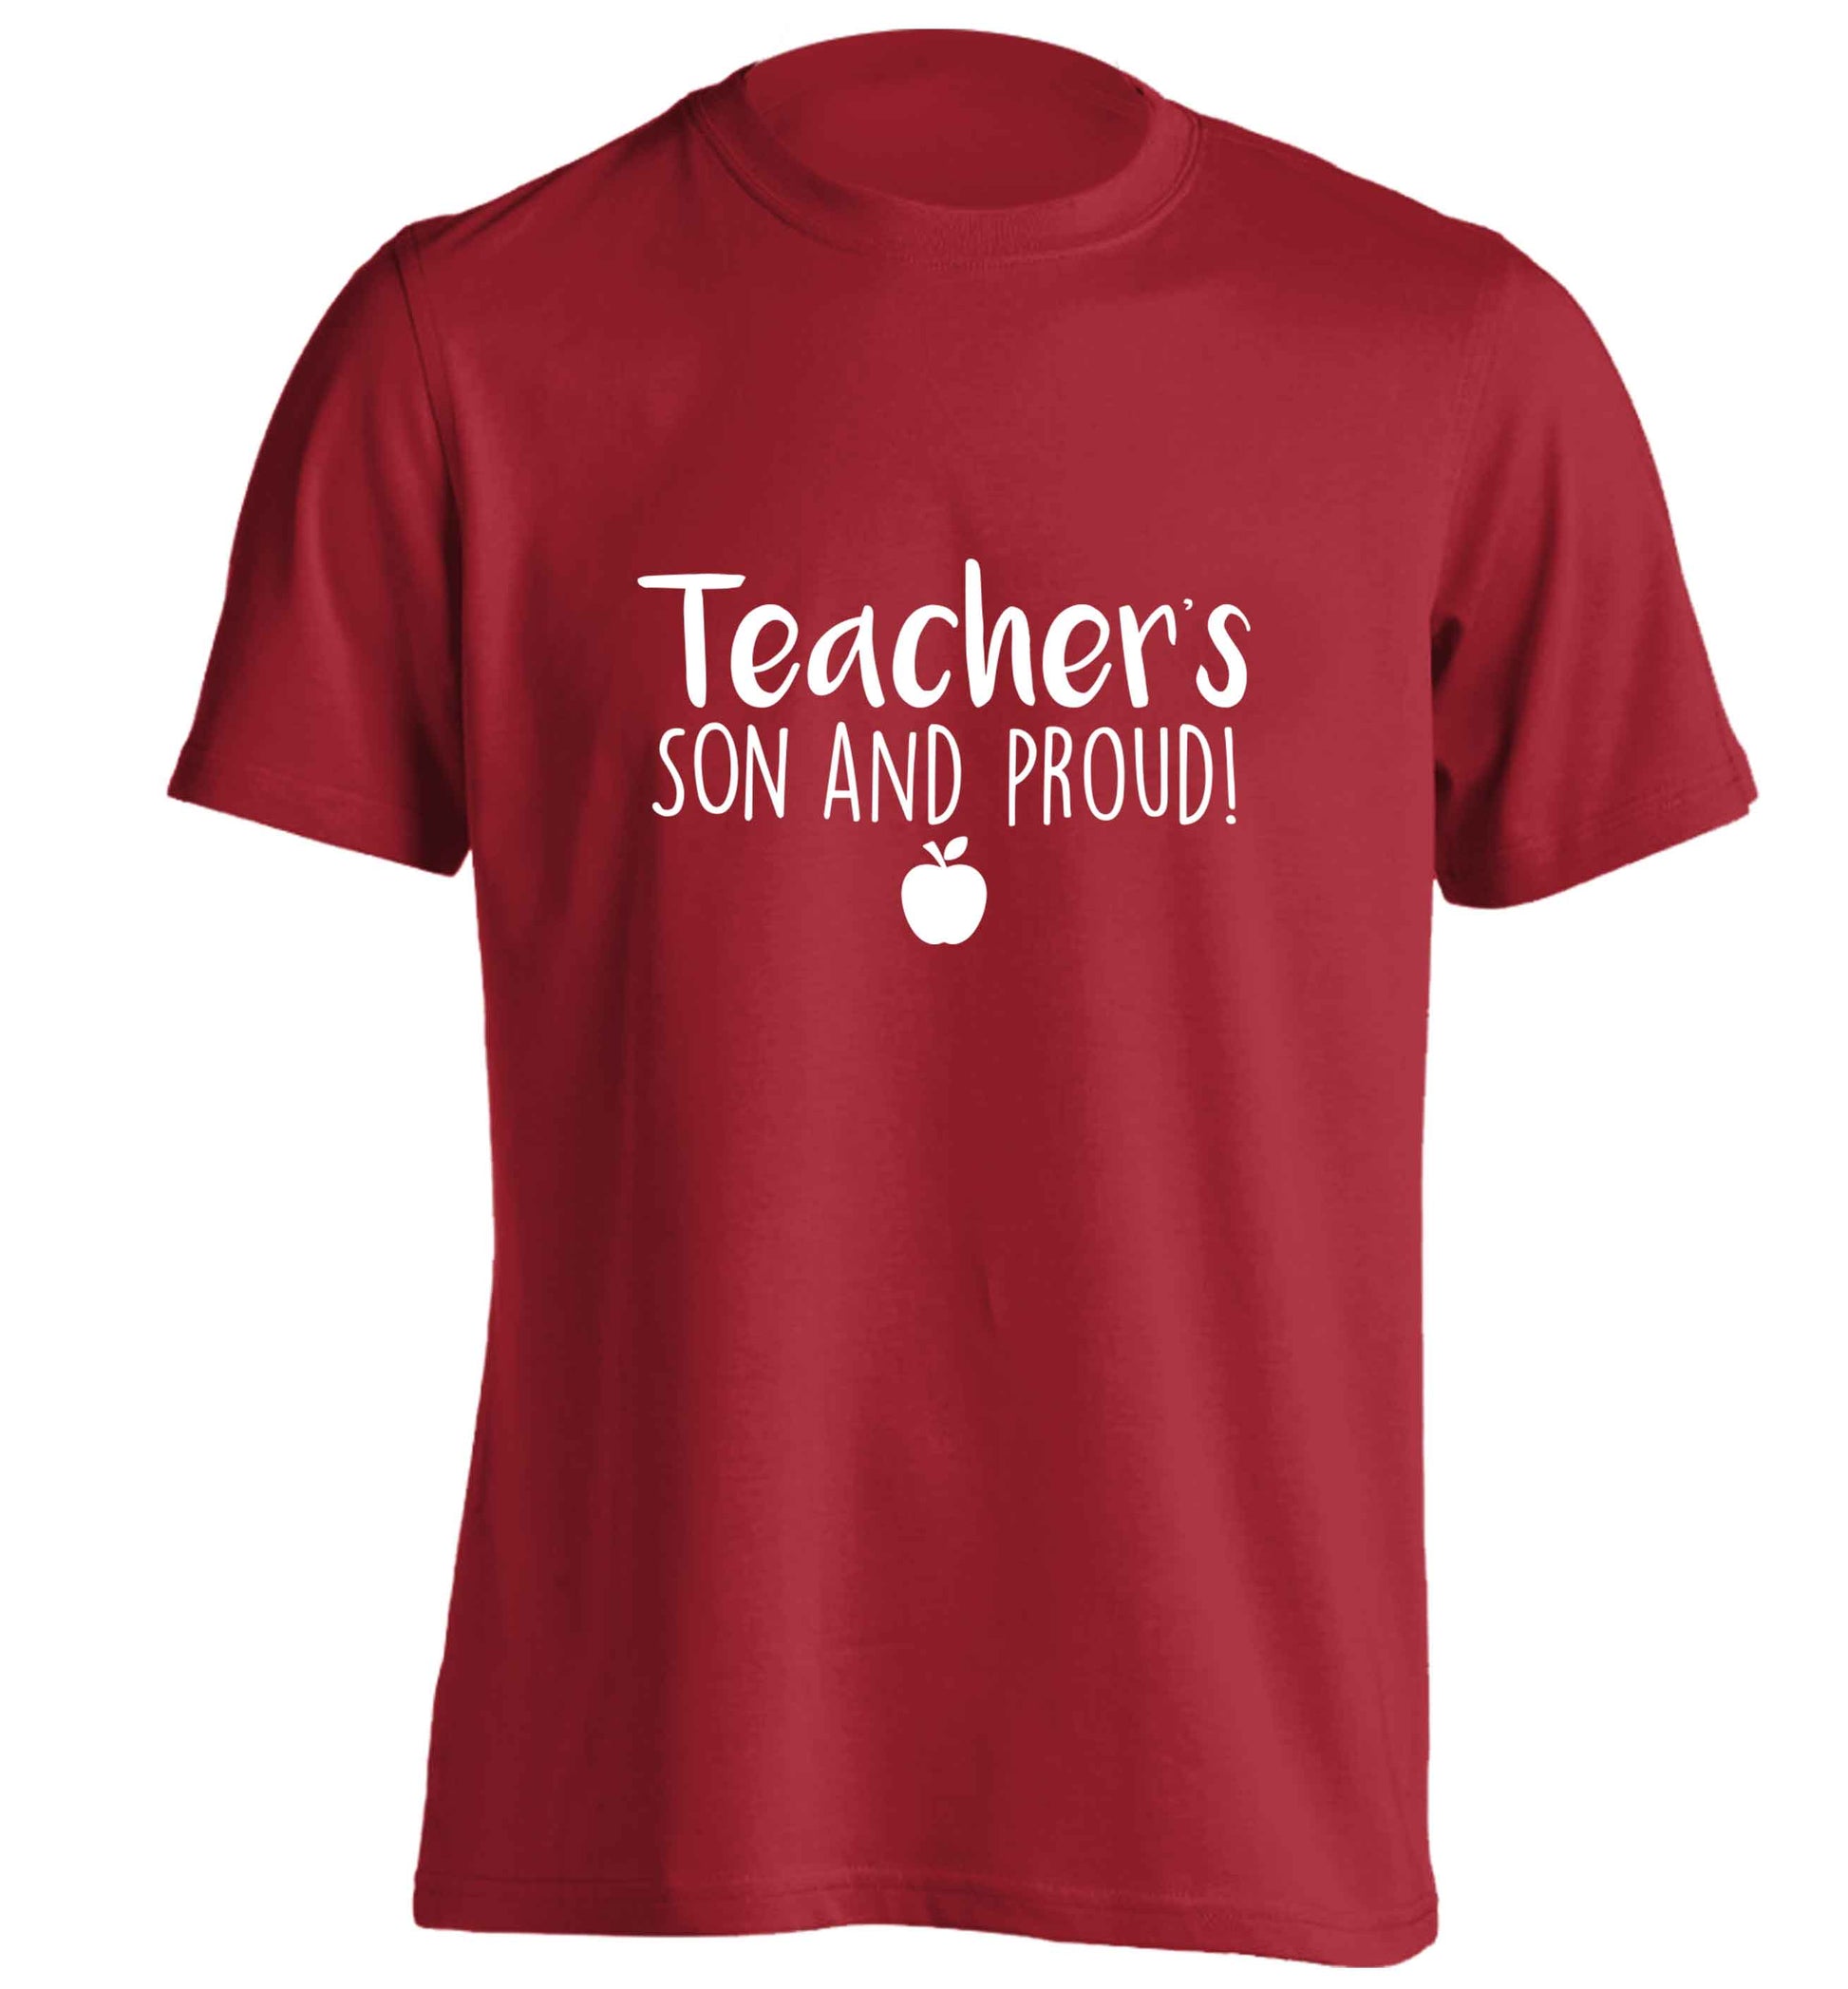 Teachers son and proud adults unisex red Tshirt 2XL